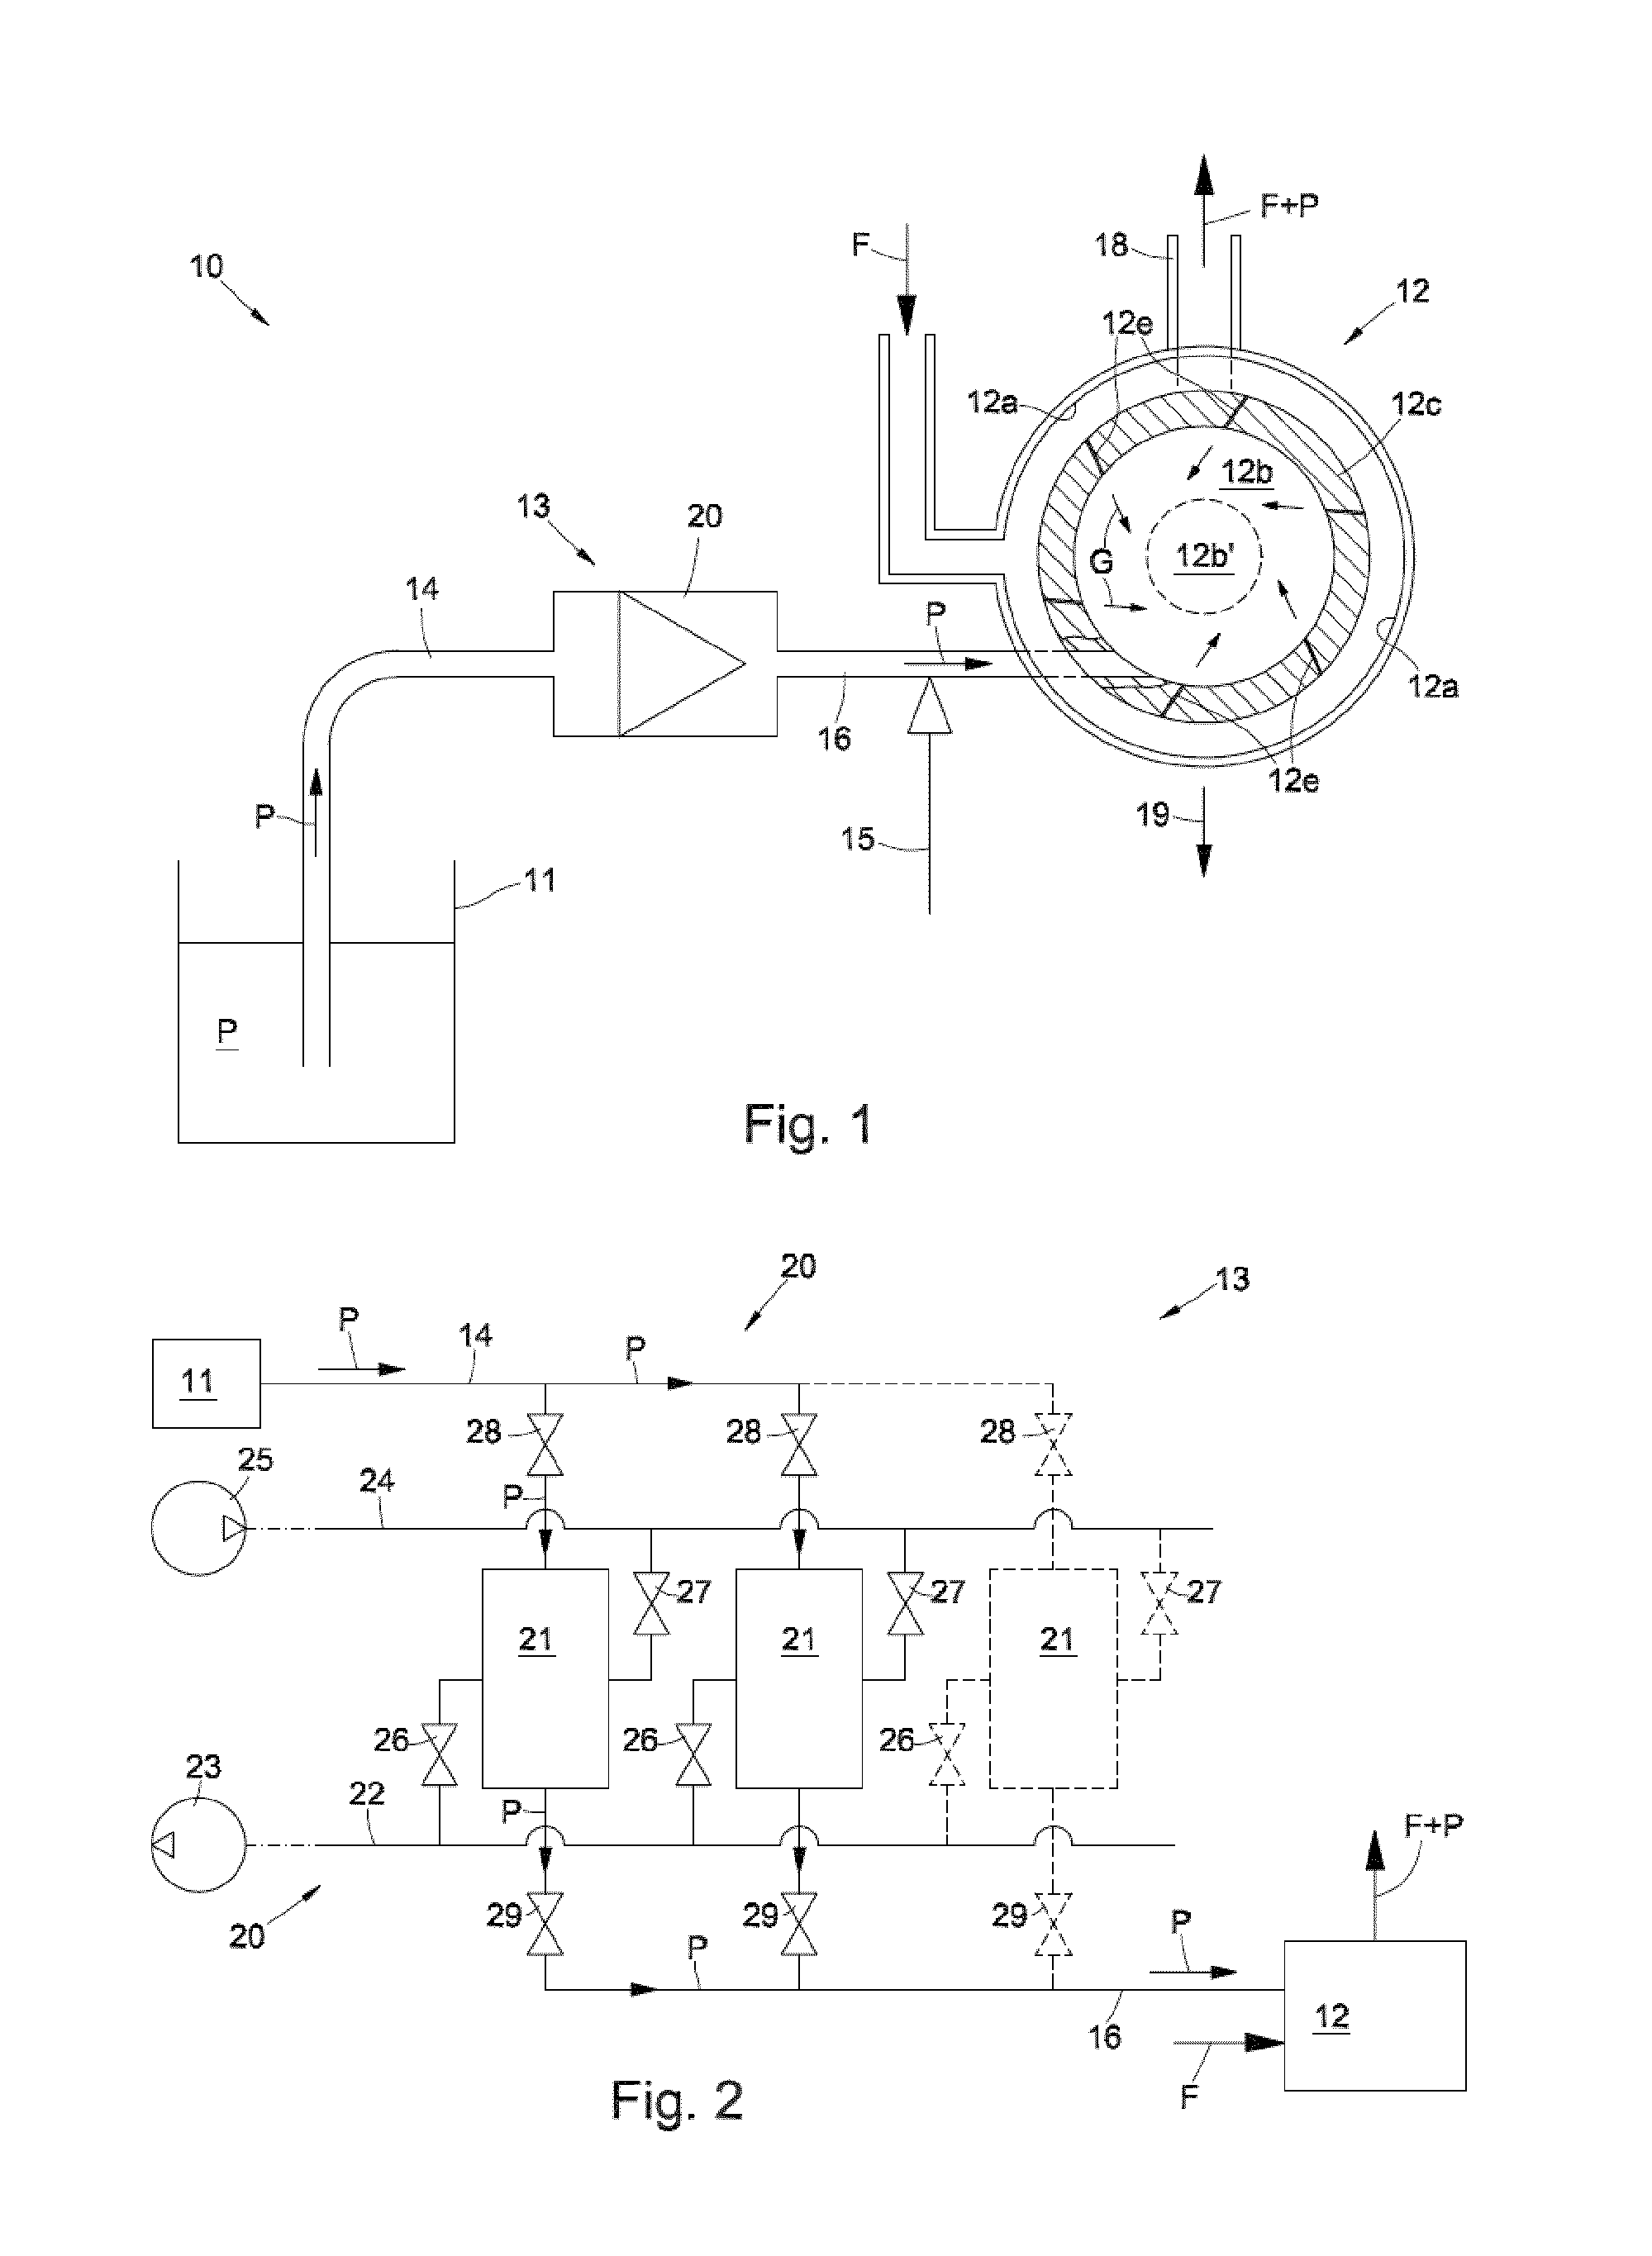 Spiral jet mill apparatus for micronisation of a powdered material or a material containing particles in general, with a novel system for feeding and dispensing the powdered material to be micronised, and corresponding process for micronisation of a powdered product